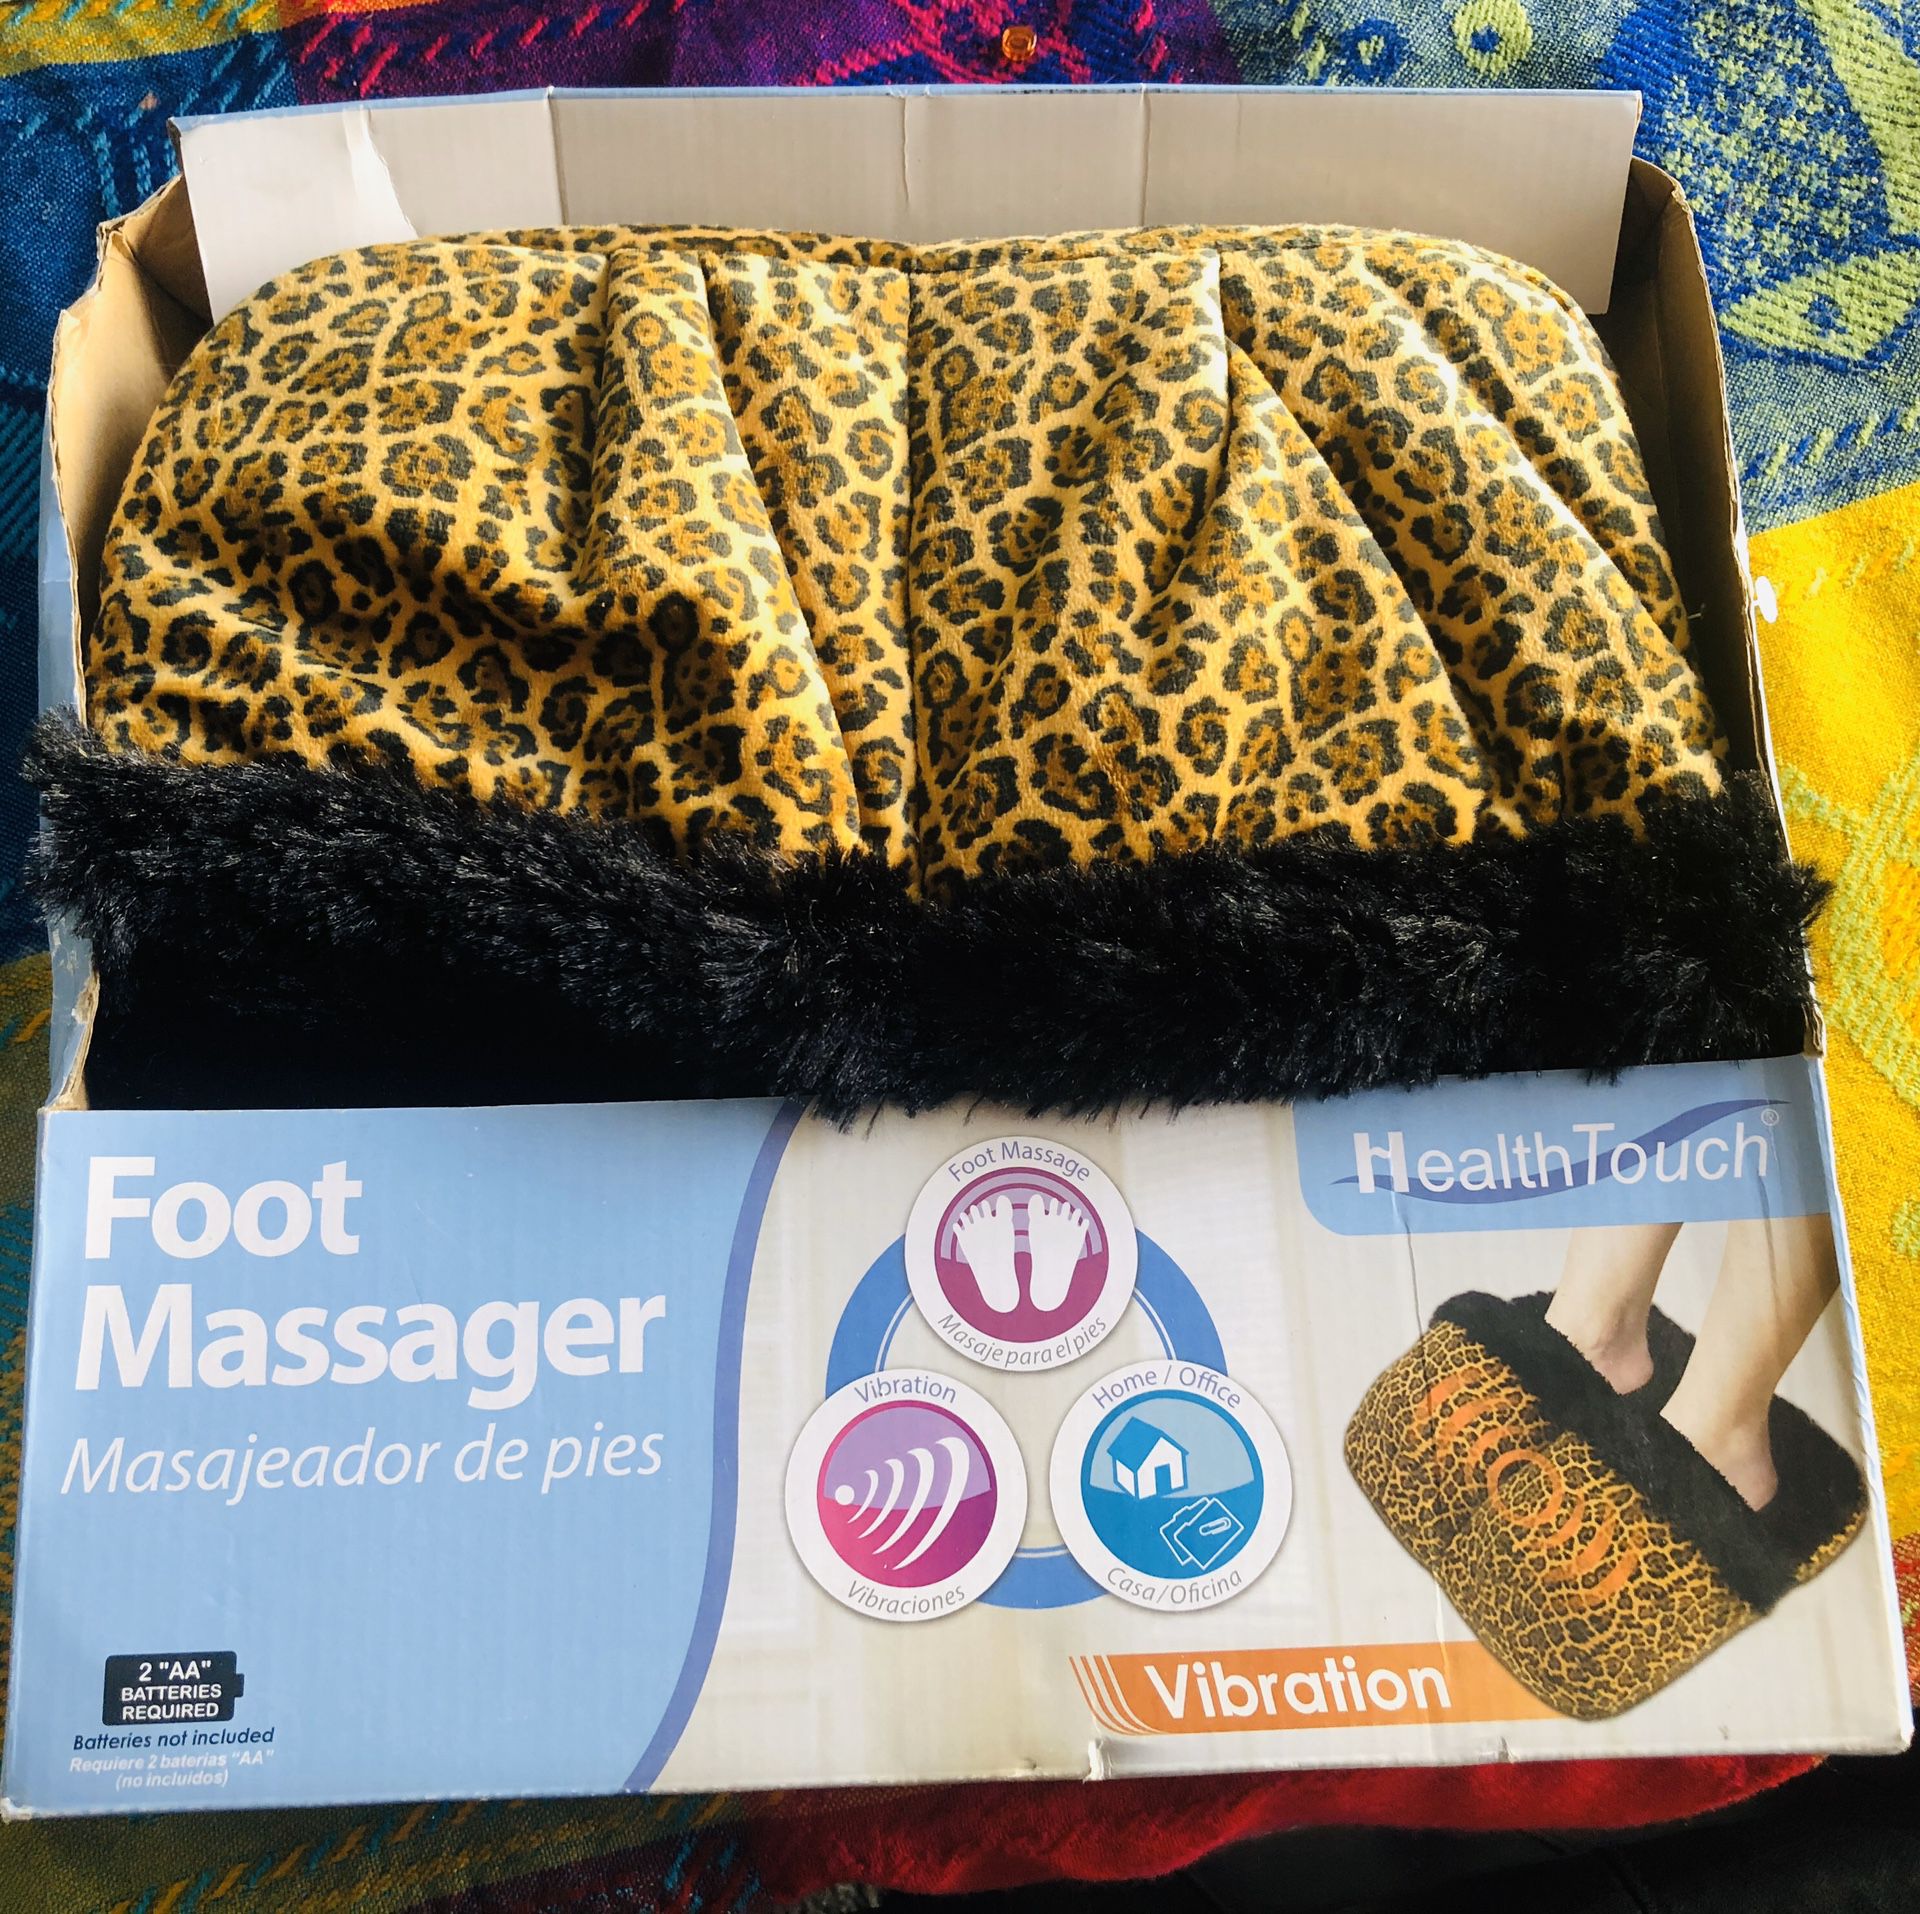 Leopard Skin Foot Massager with Luxuriously Soft Fabric